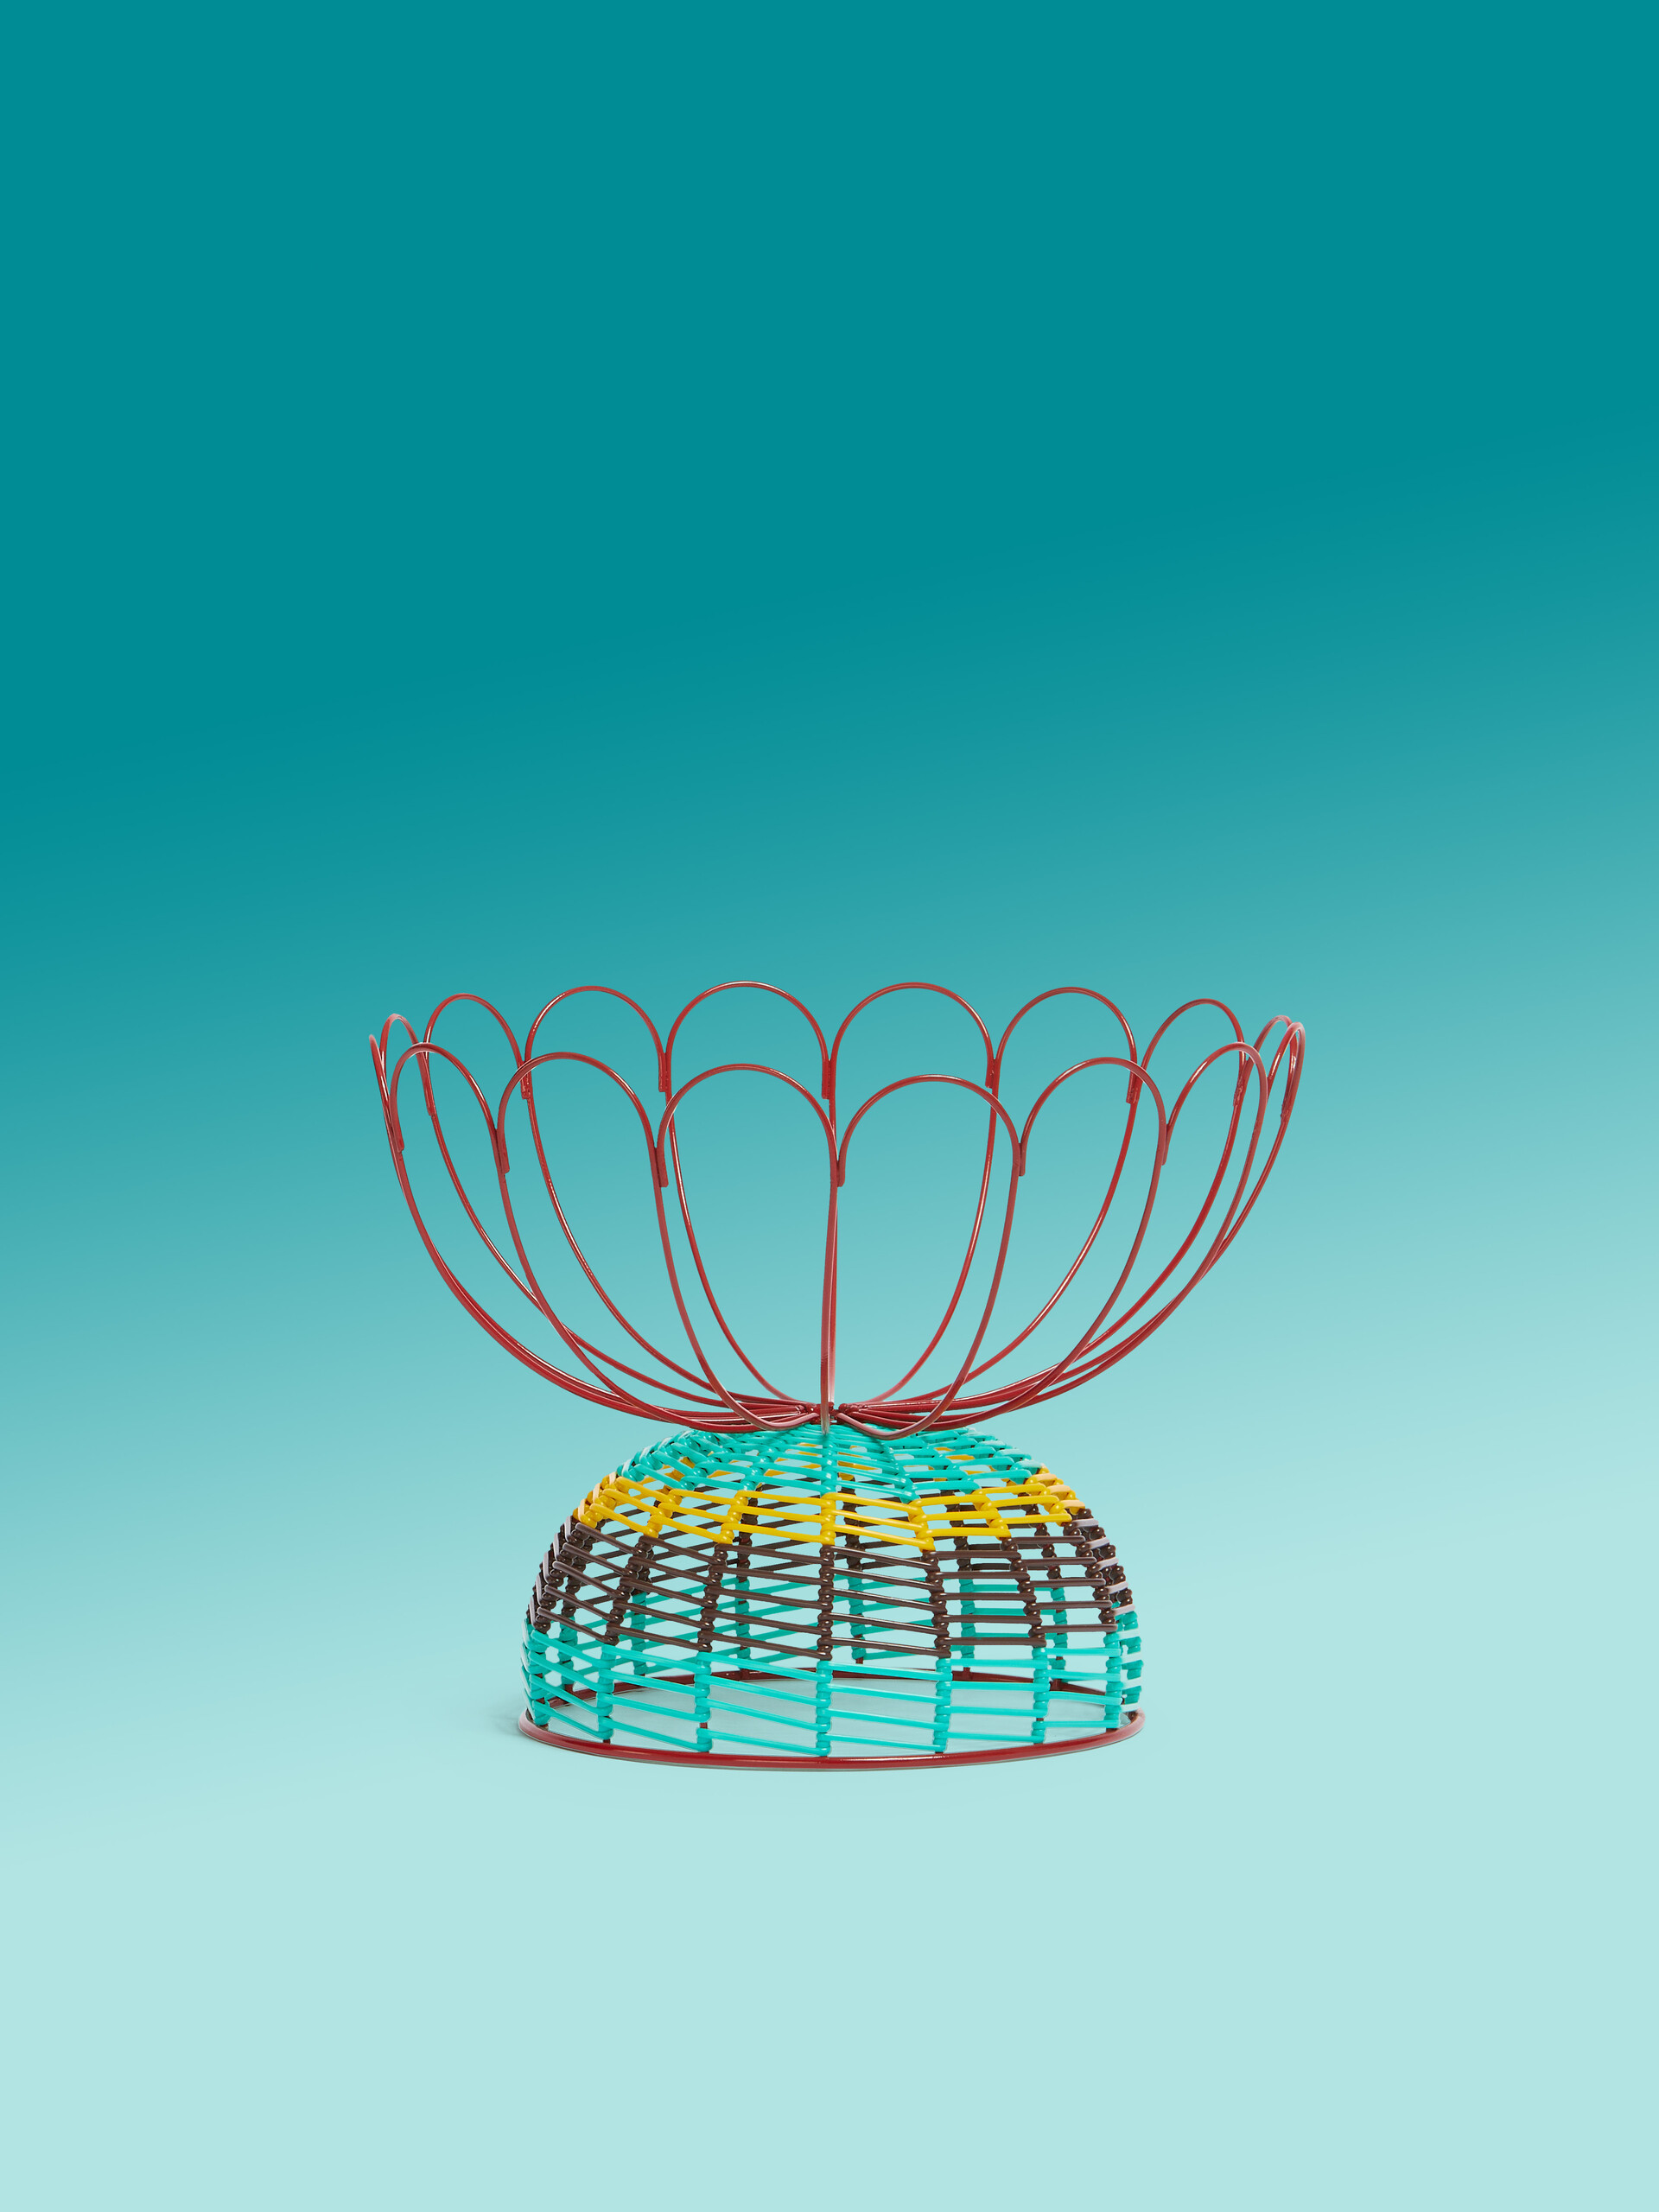 Turquoise Marni Market Wire Fruit Basket - Accessories - Image 1